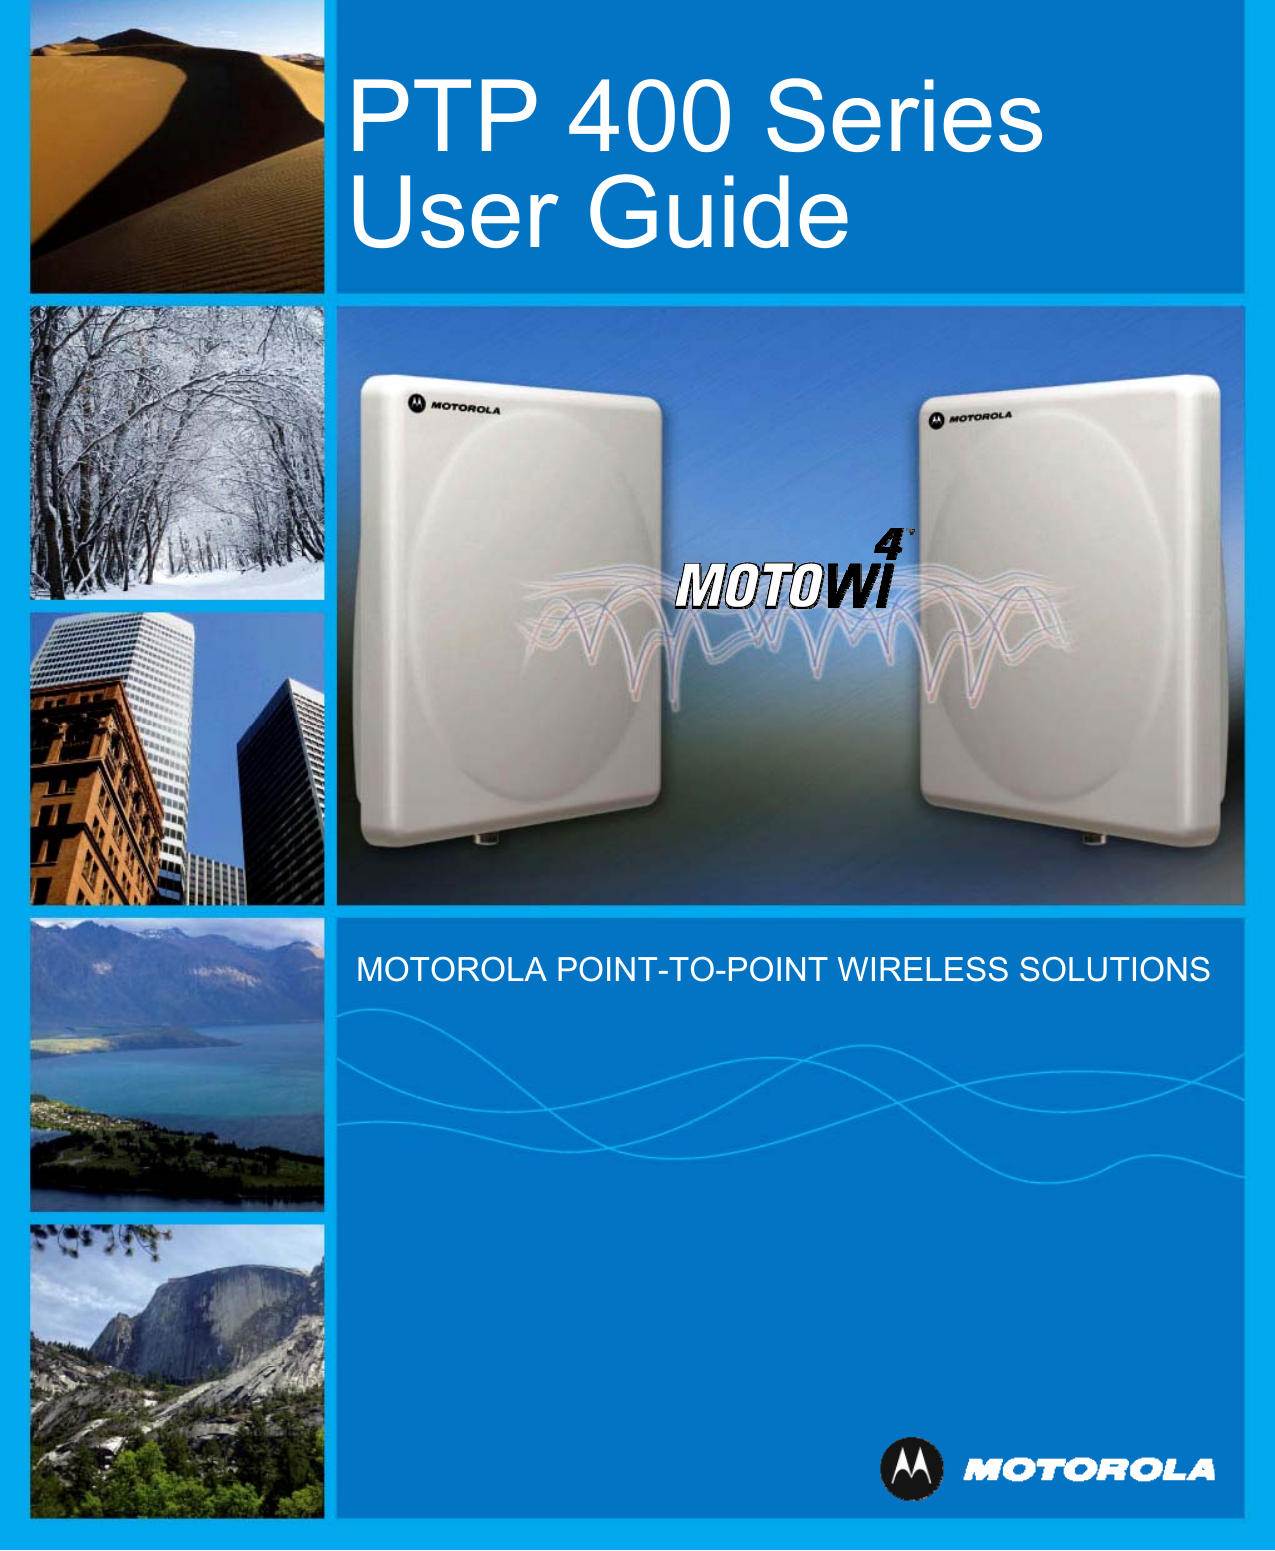   PTP 400 SeriesUser Guide MOTOROLA POINT-TO-POINT WIRELESS SOLUTIONS 